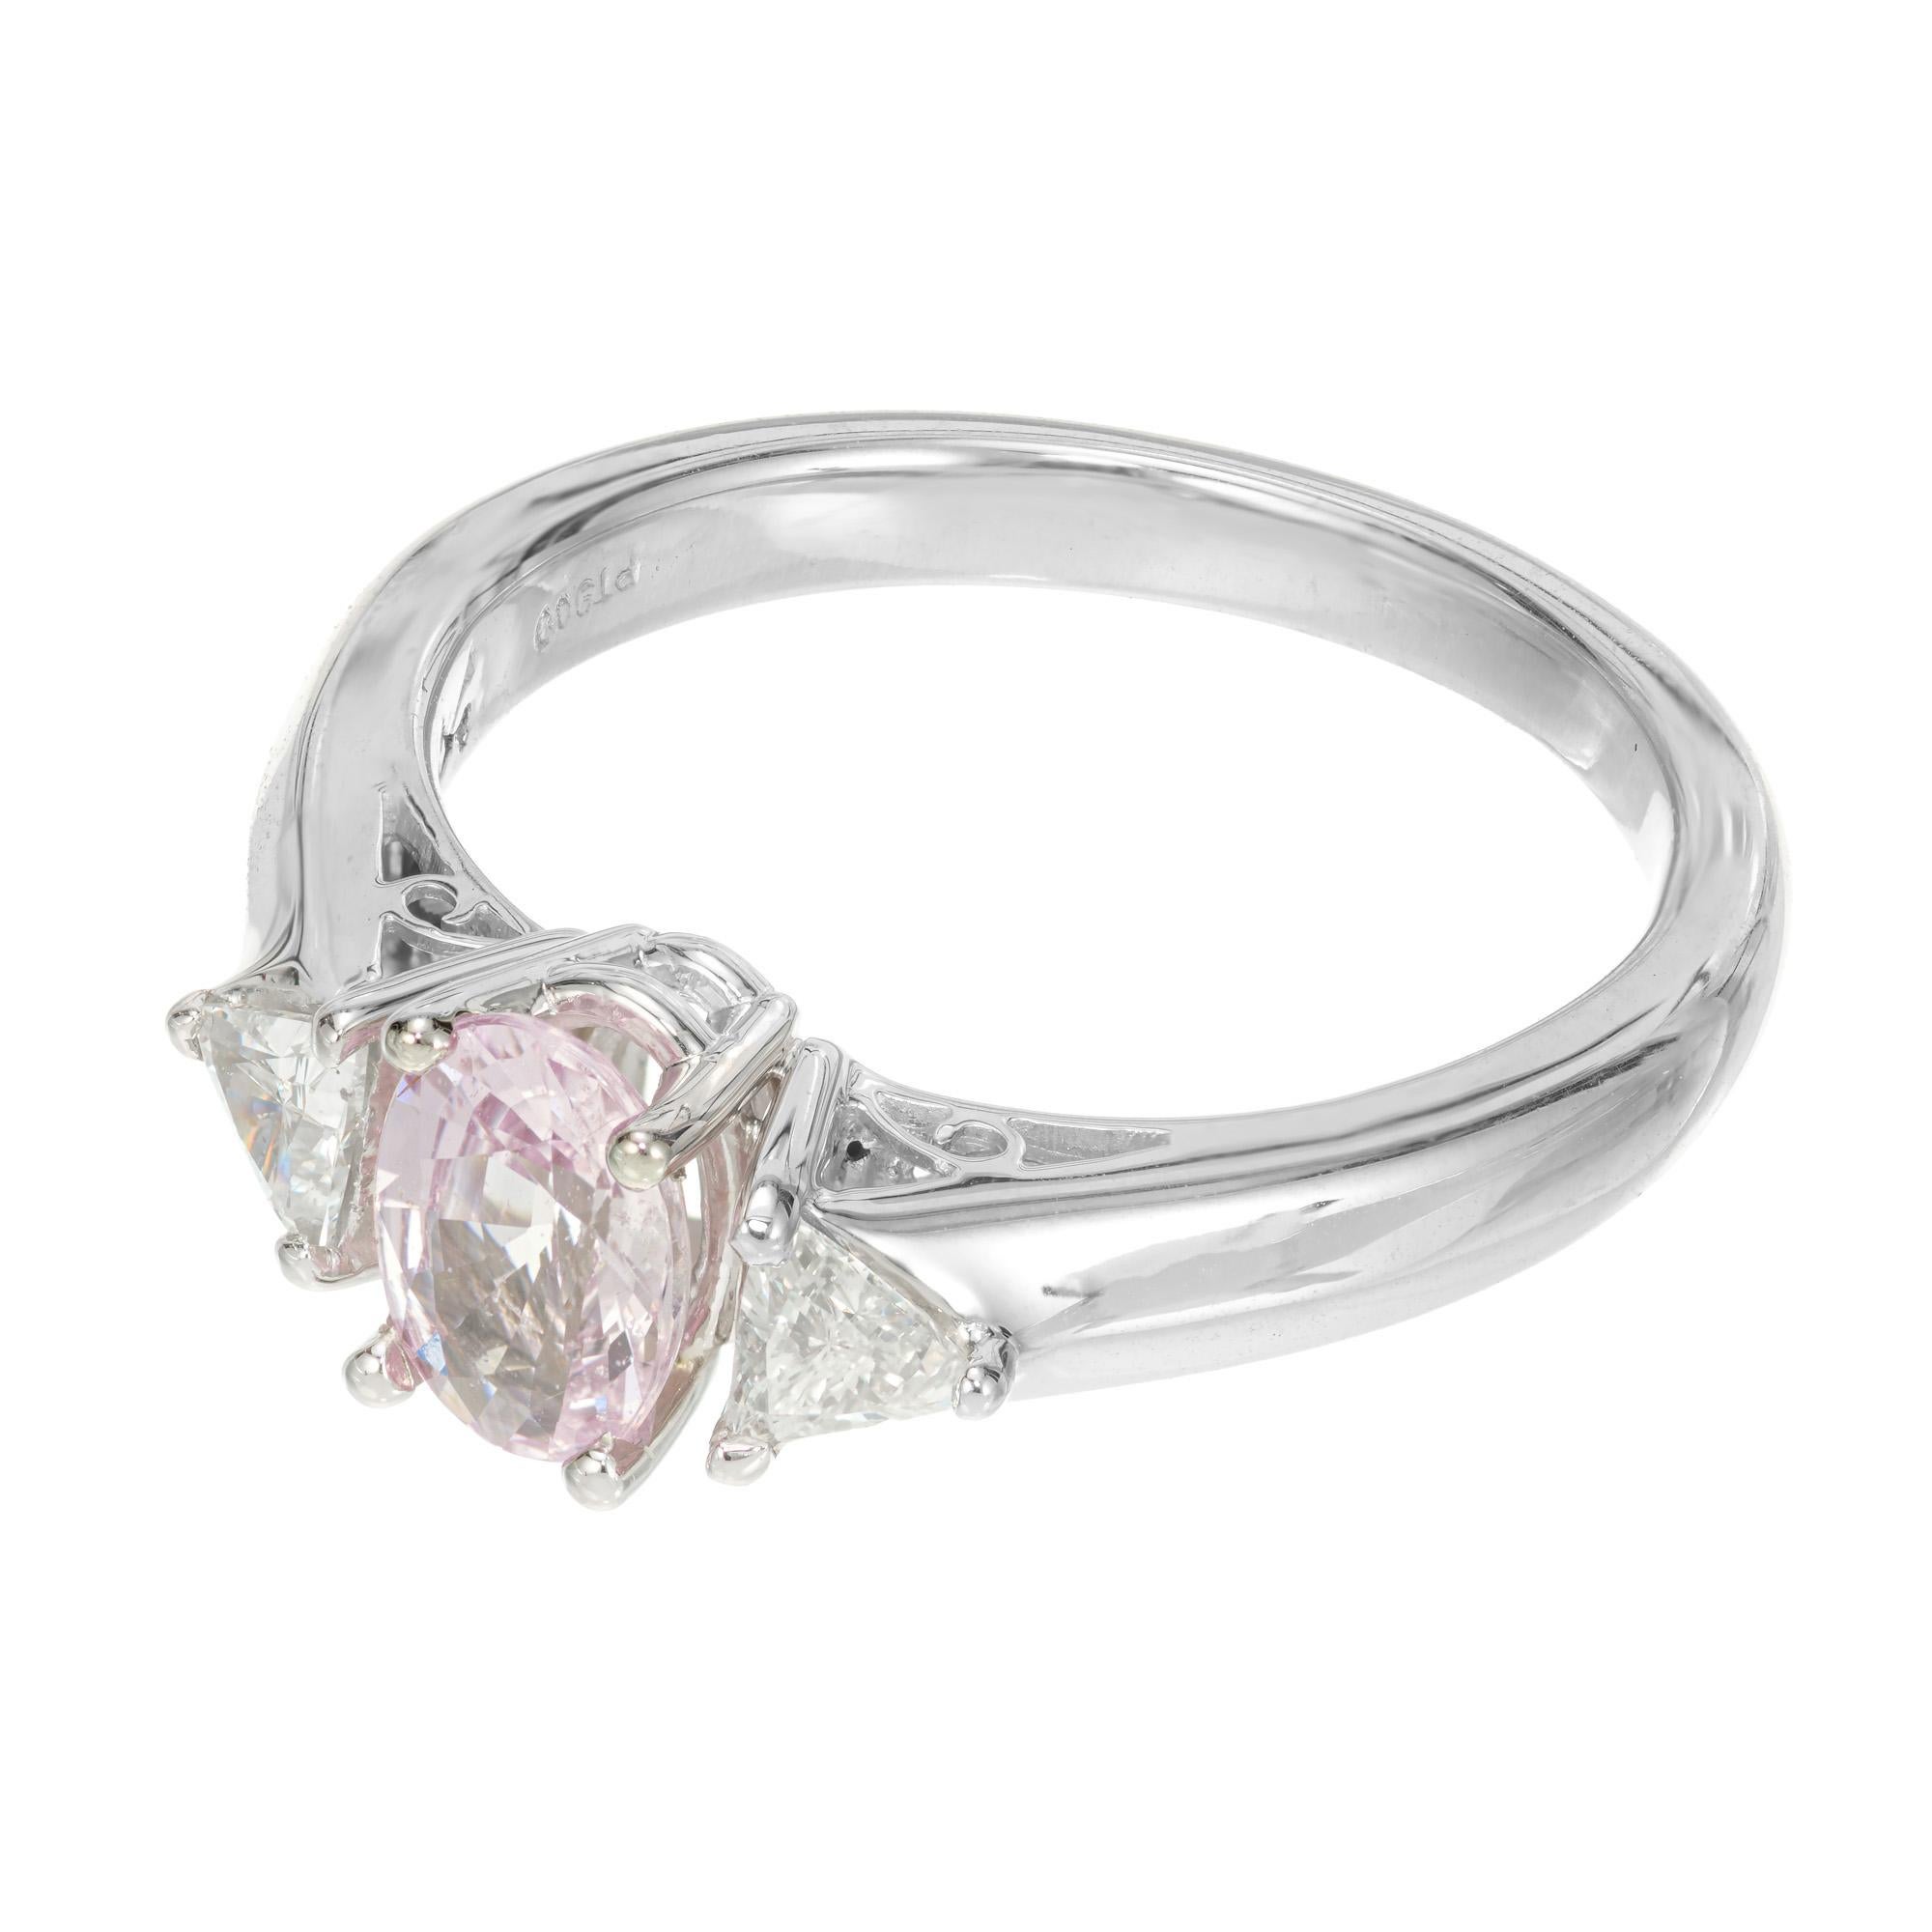 diamond ring with pink sapphire side stones